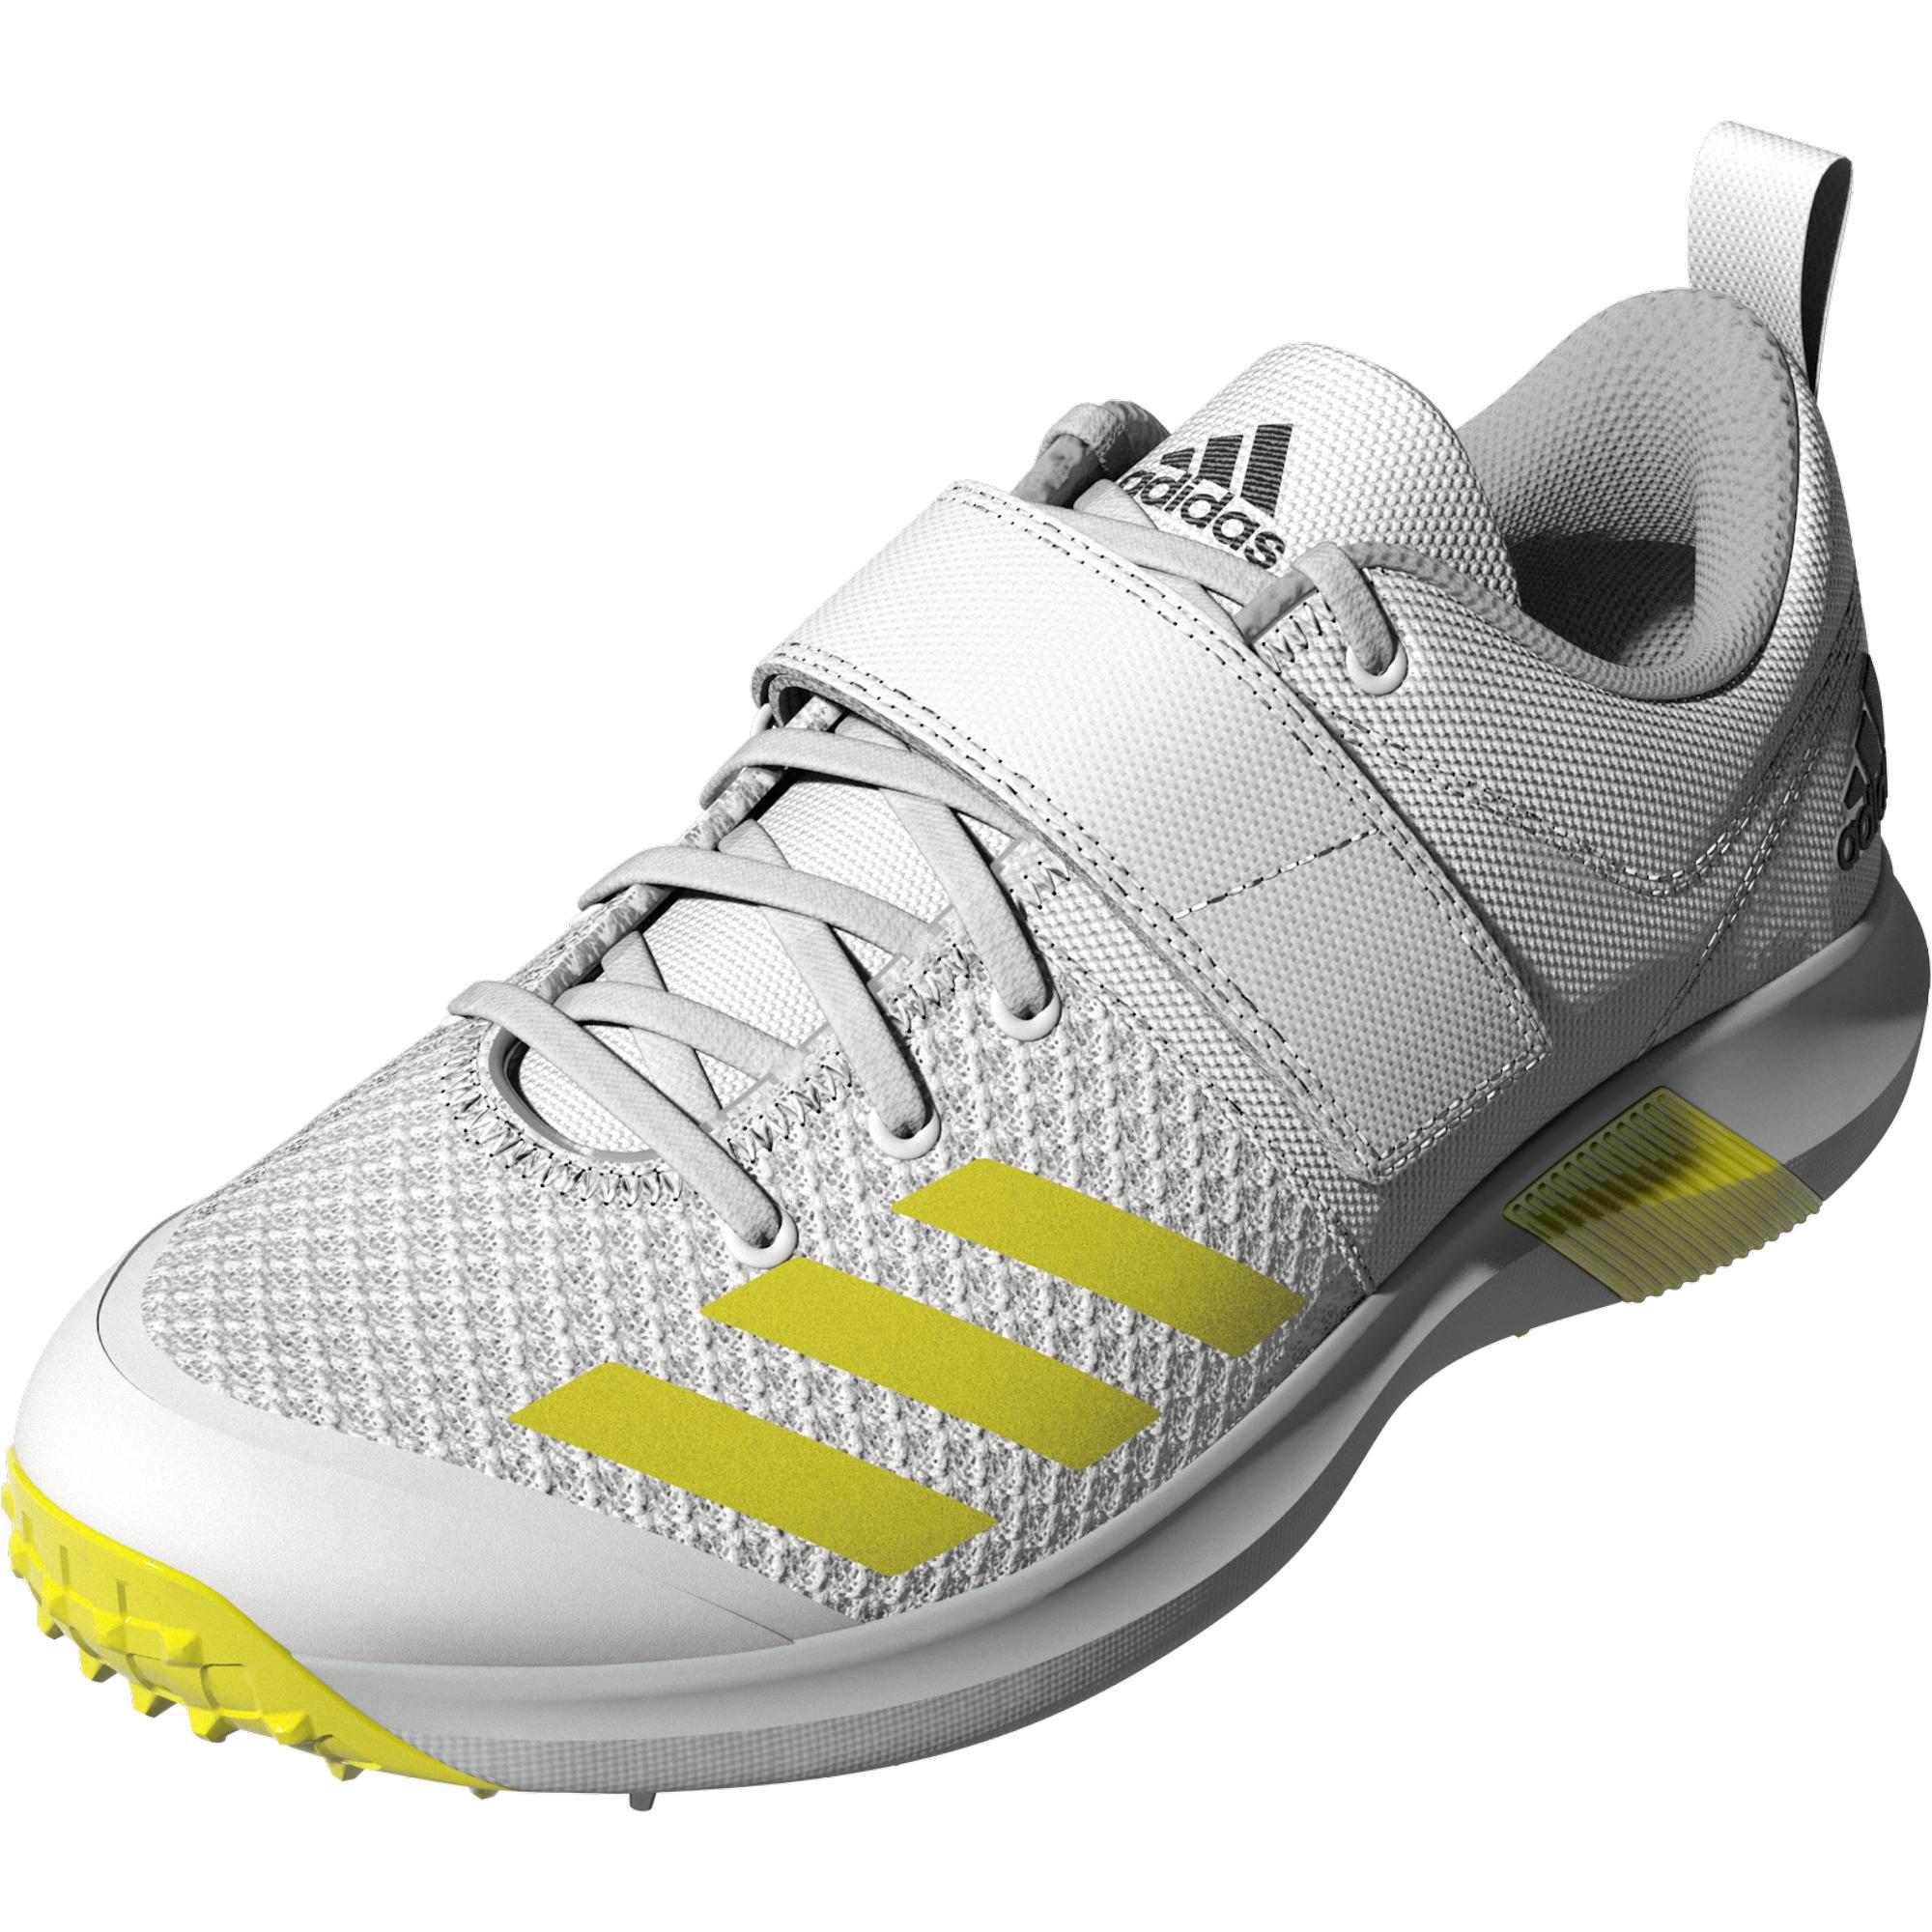 adipower cricket shoes